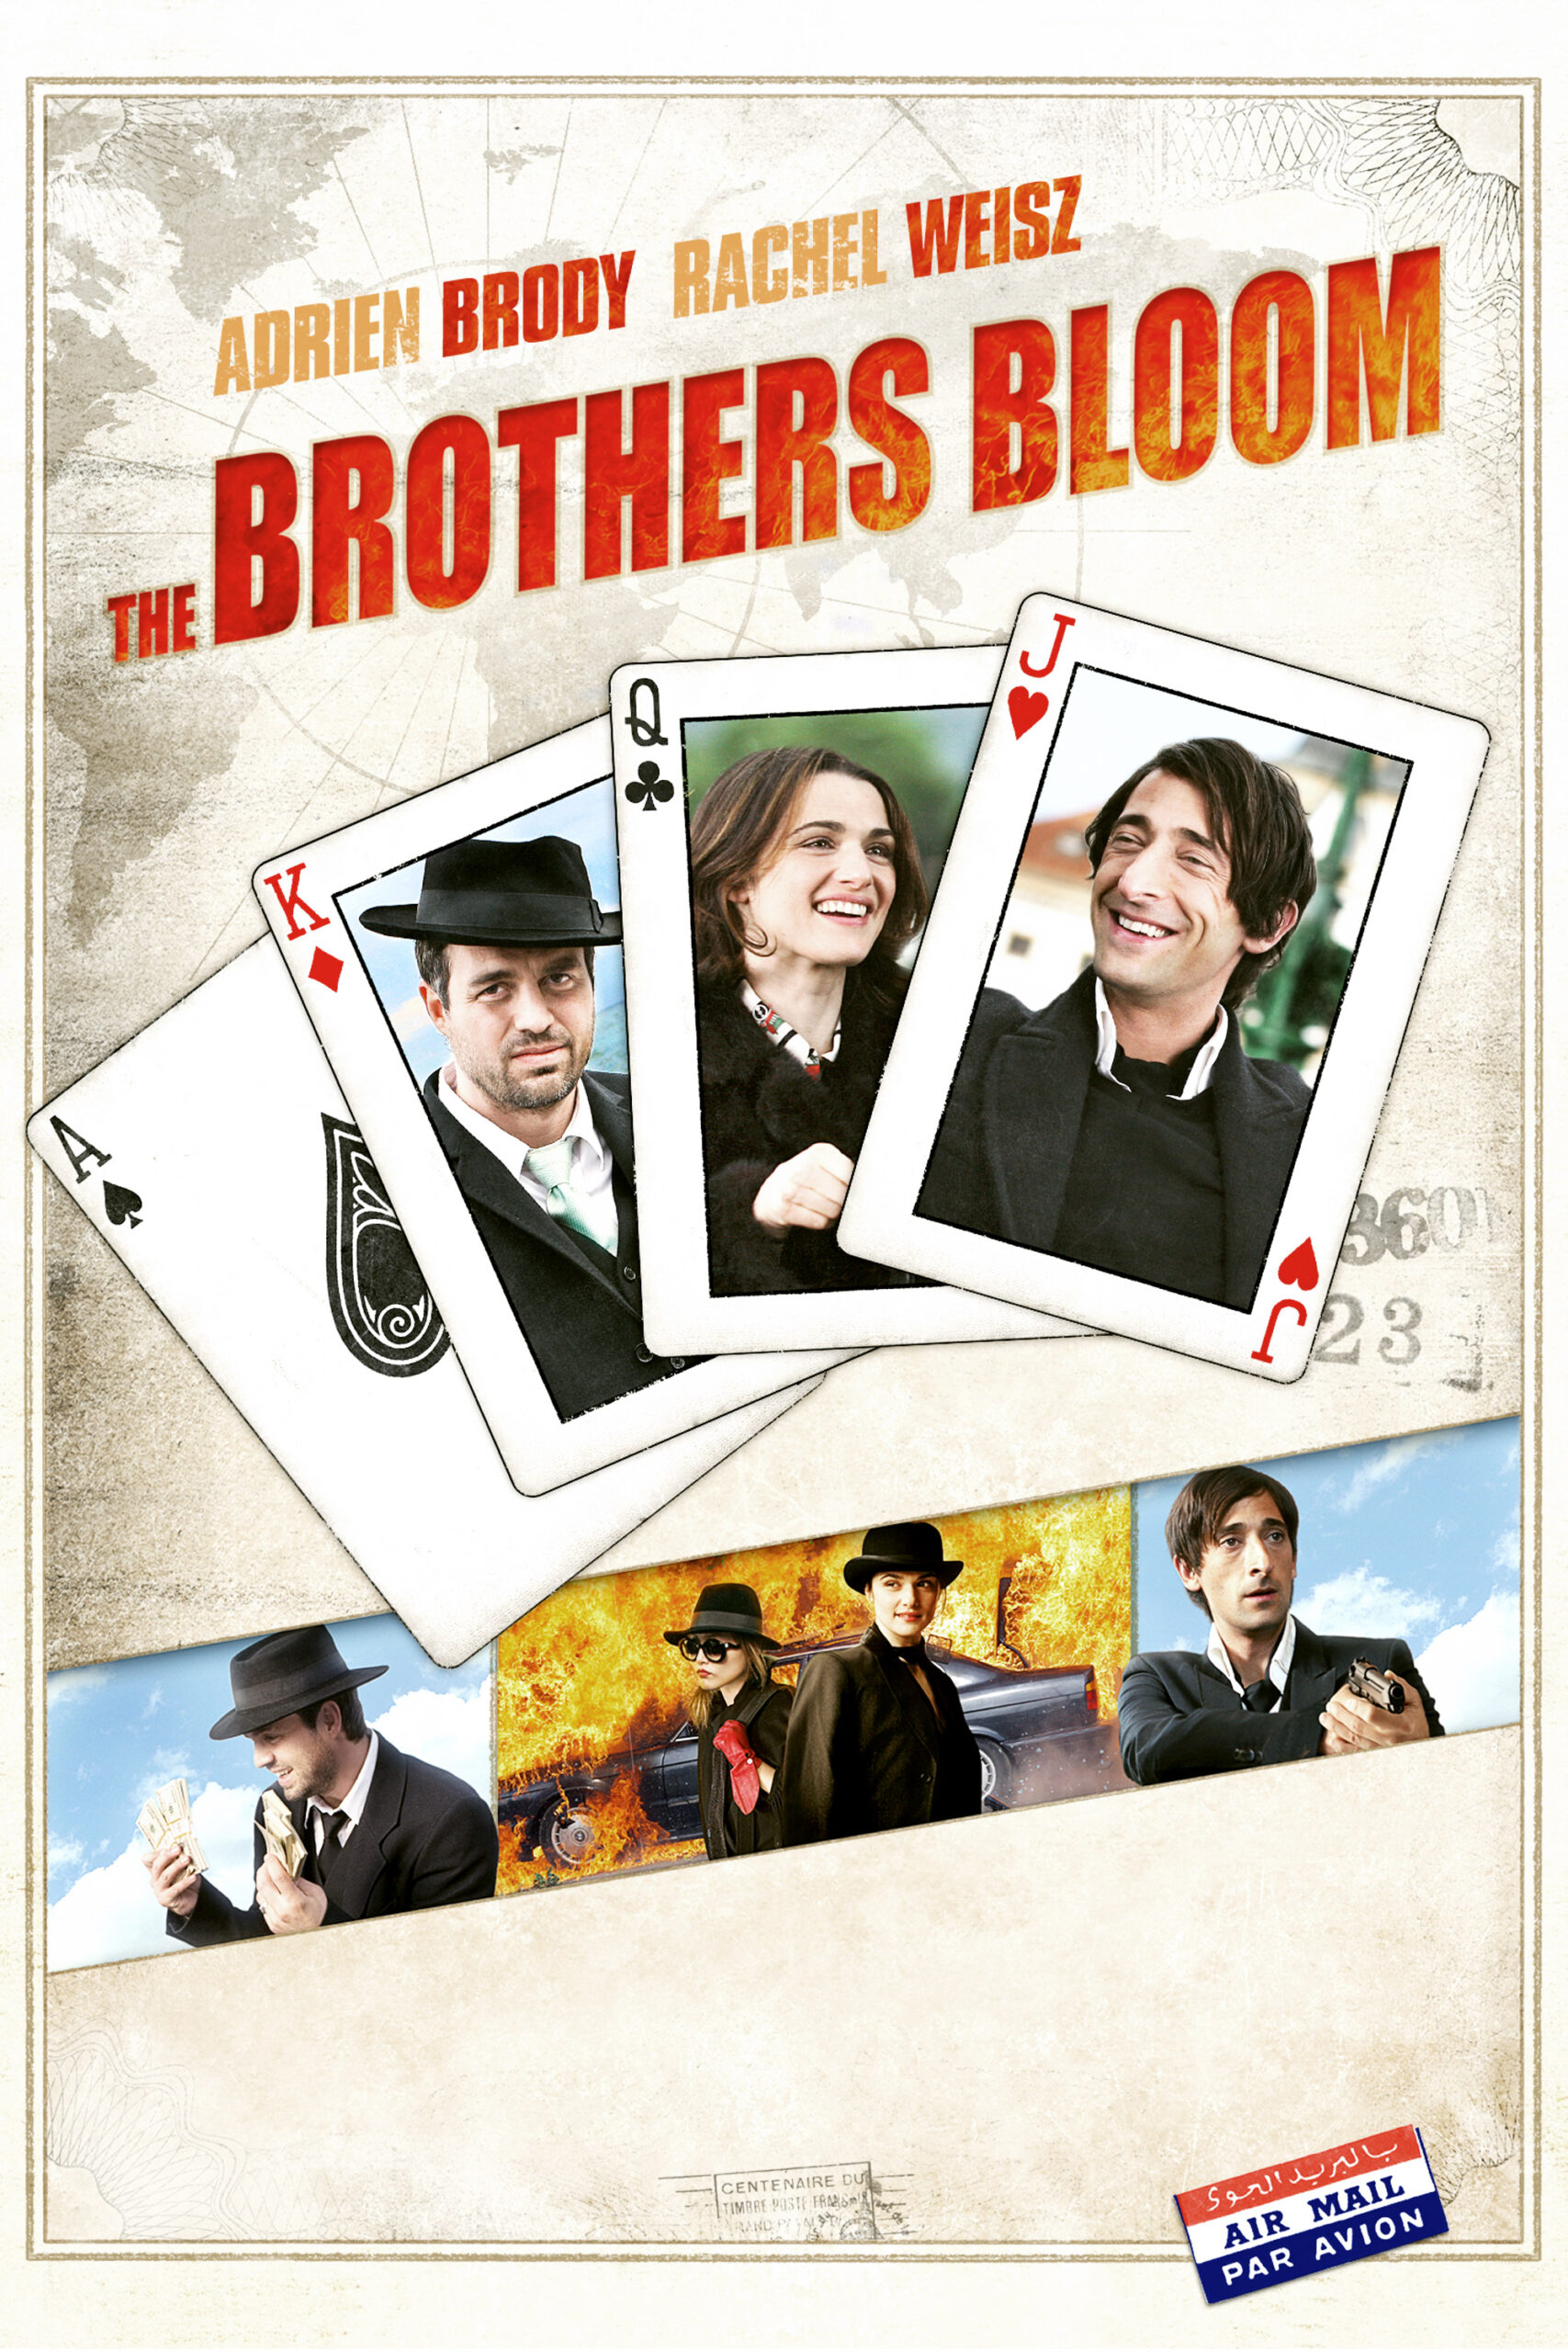 Read more about the article The Brothers Bloom